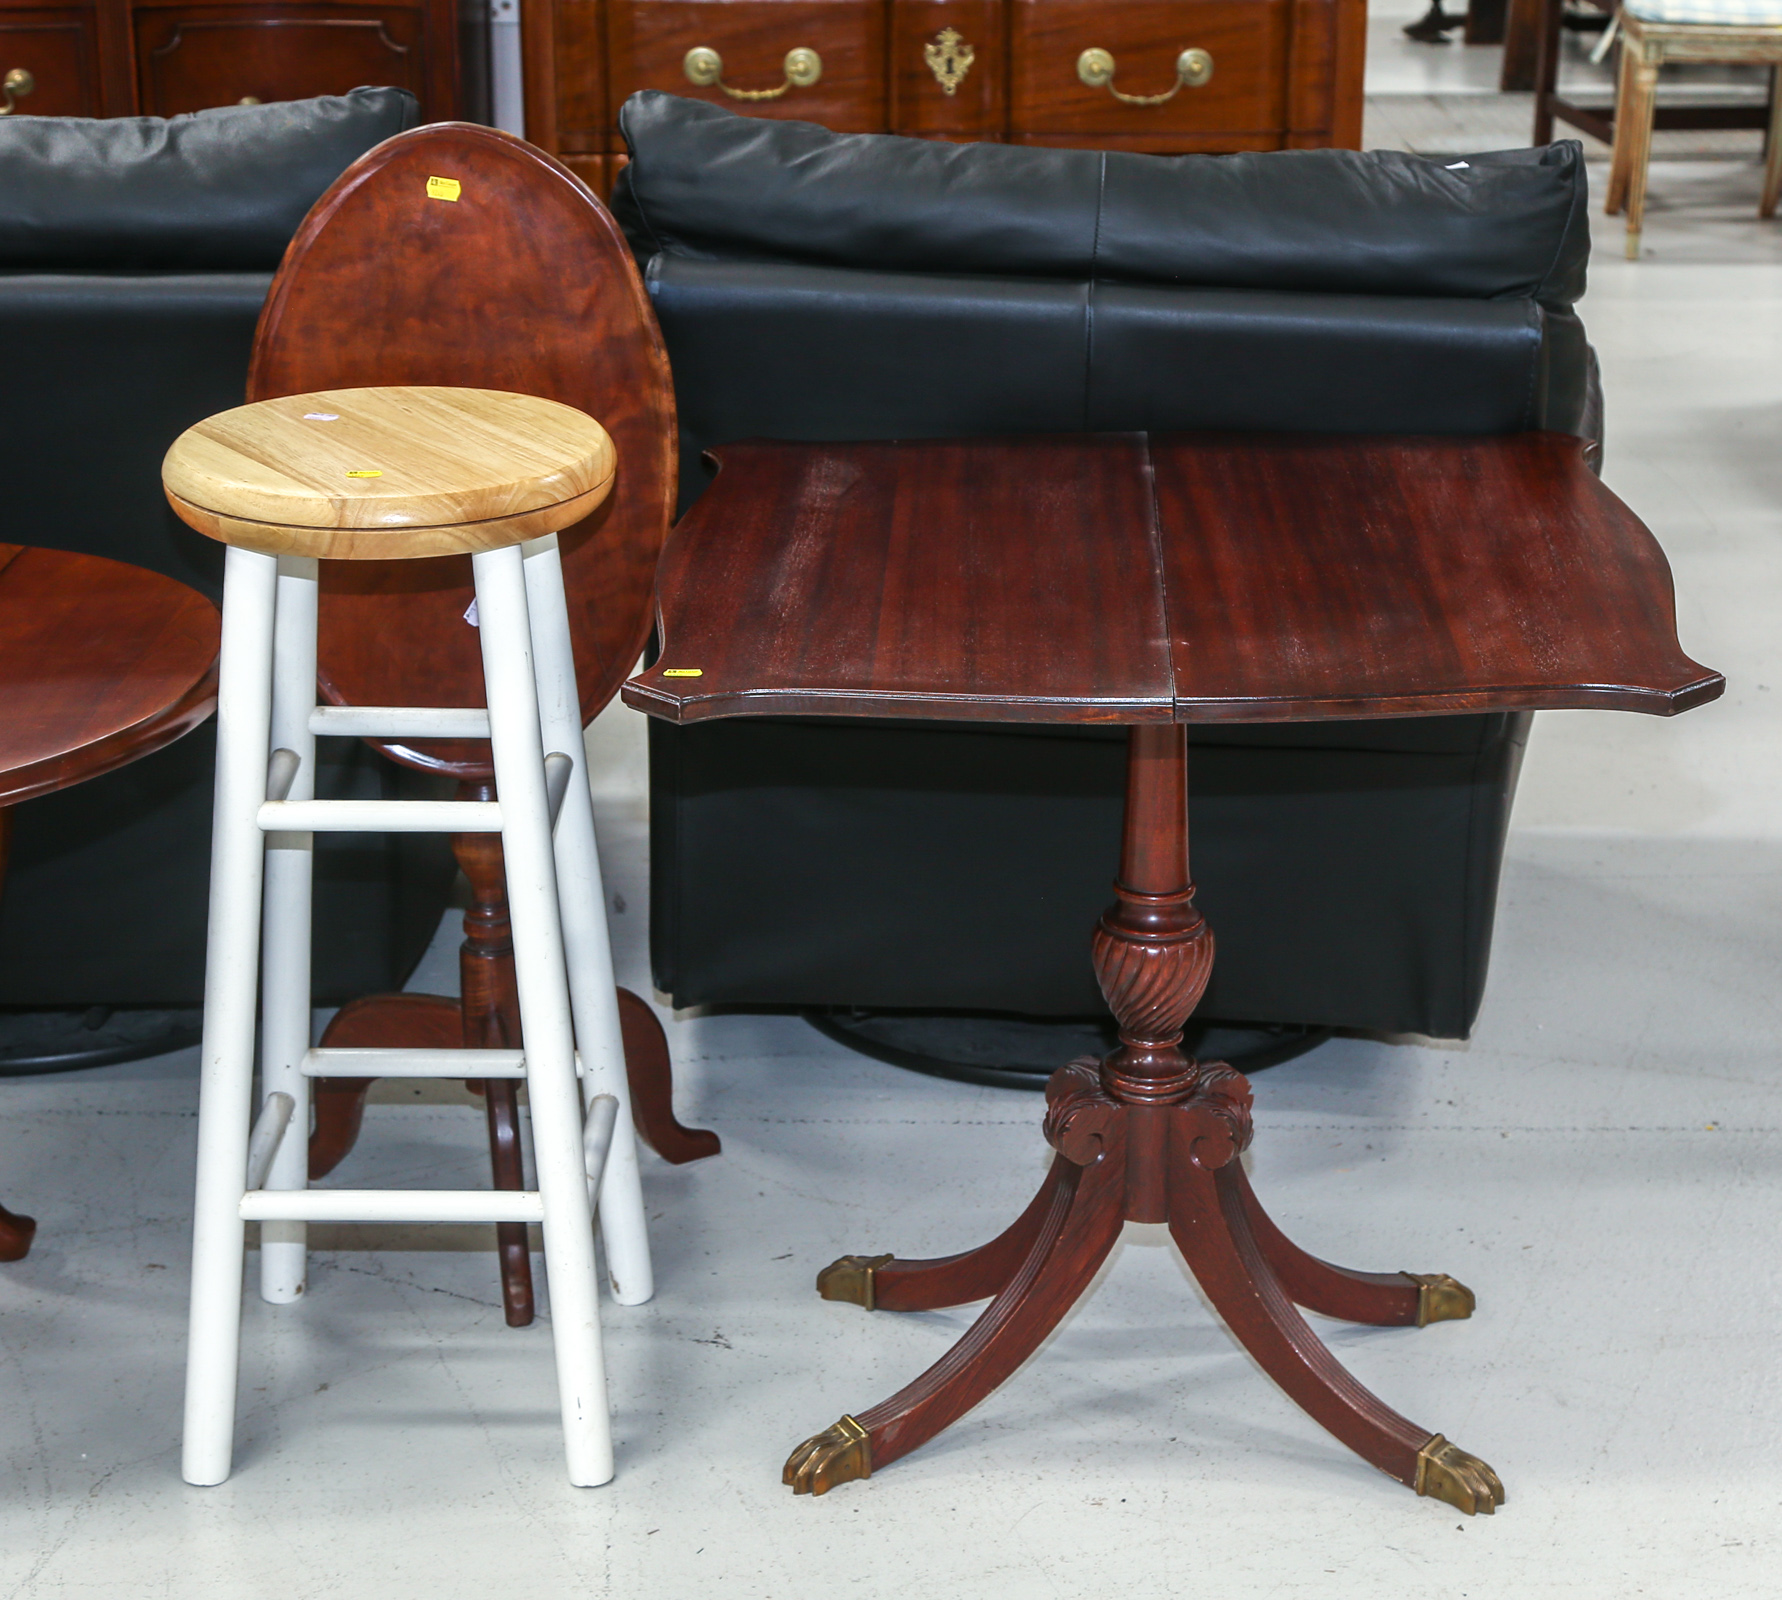 FEDERAL STYLE CARD TABLE & A STOOL